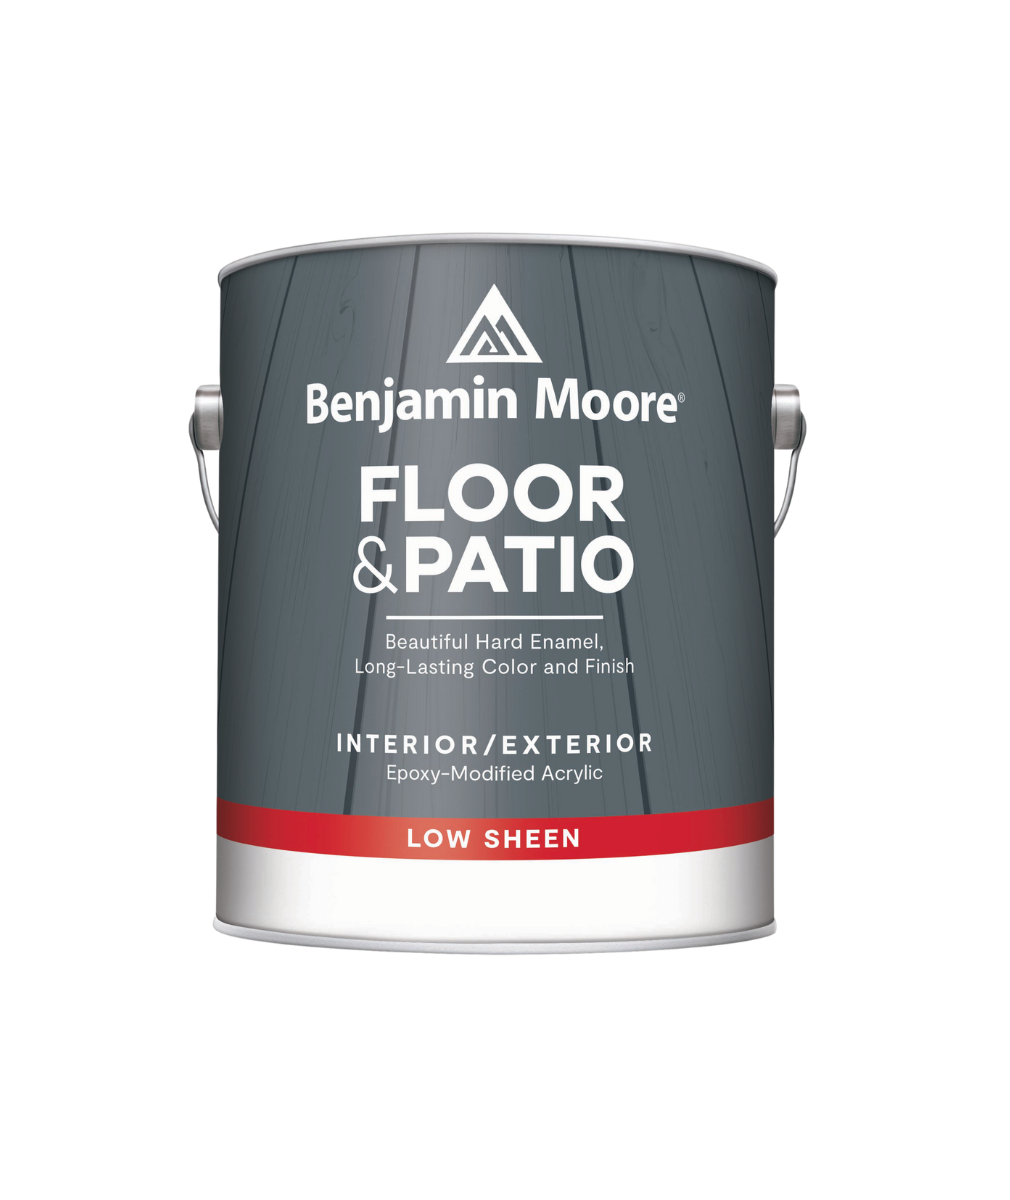 Benjamin Moore floor and patio low sheen Interior Paint available at Wallauer Paint & Design.